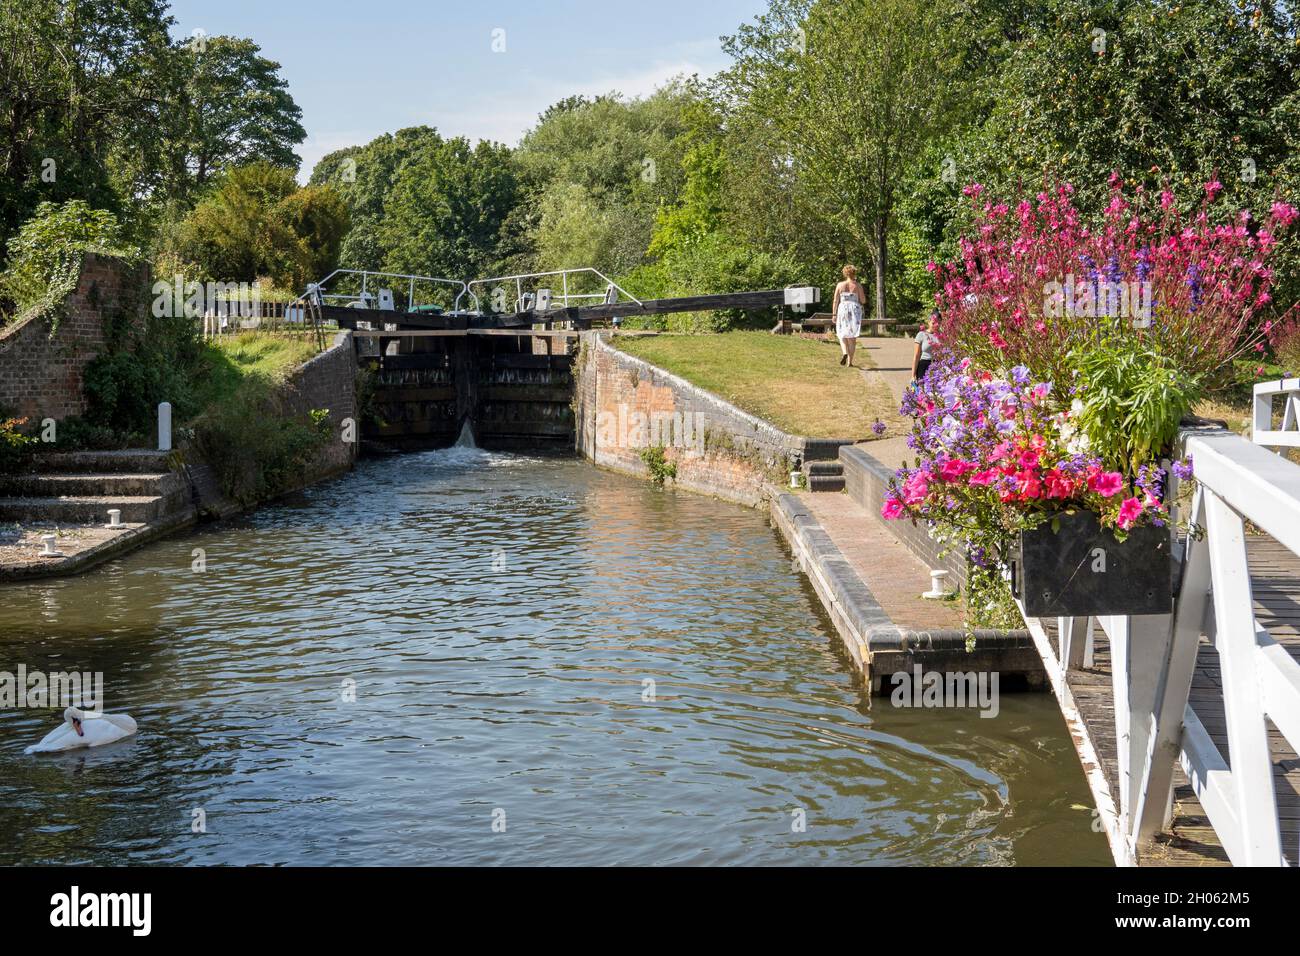 Newbury, Berkshire, England, UK. 2021.  Newbury Lock on the Kennet and Avon Canal a swan and floral flower display on a footbridge. Stock Photo